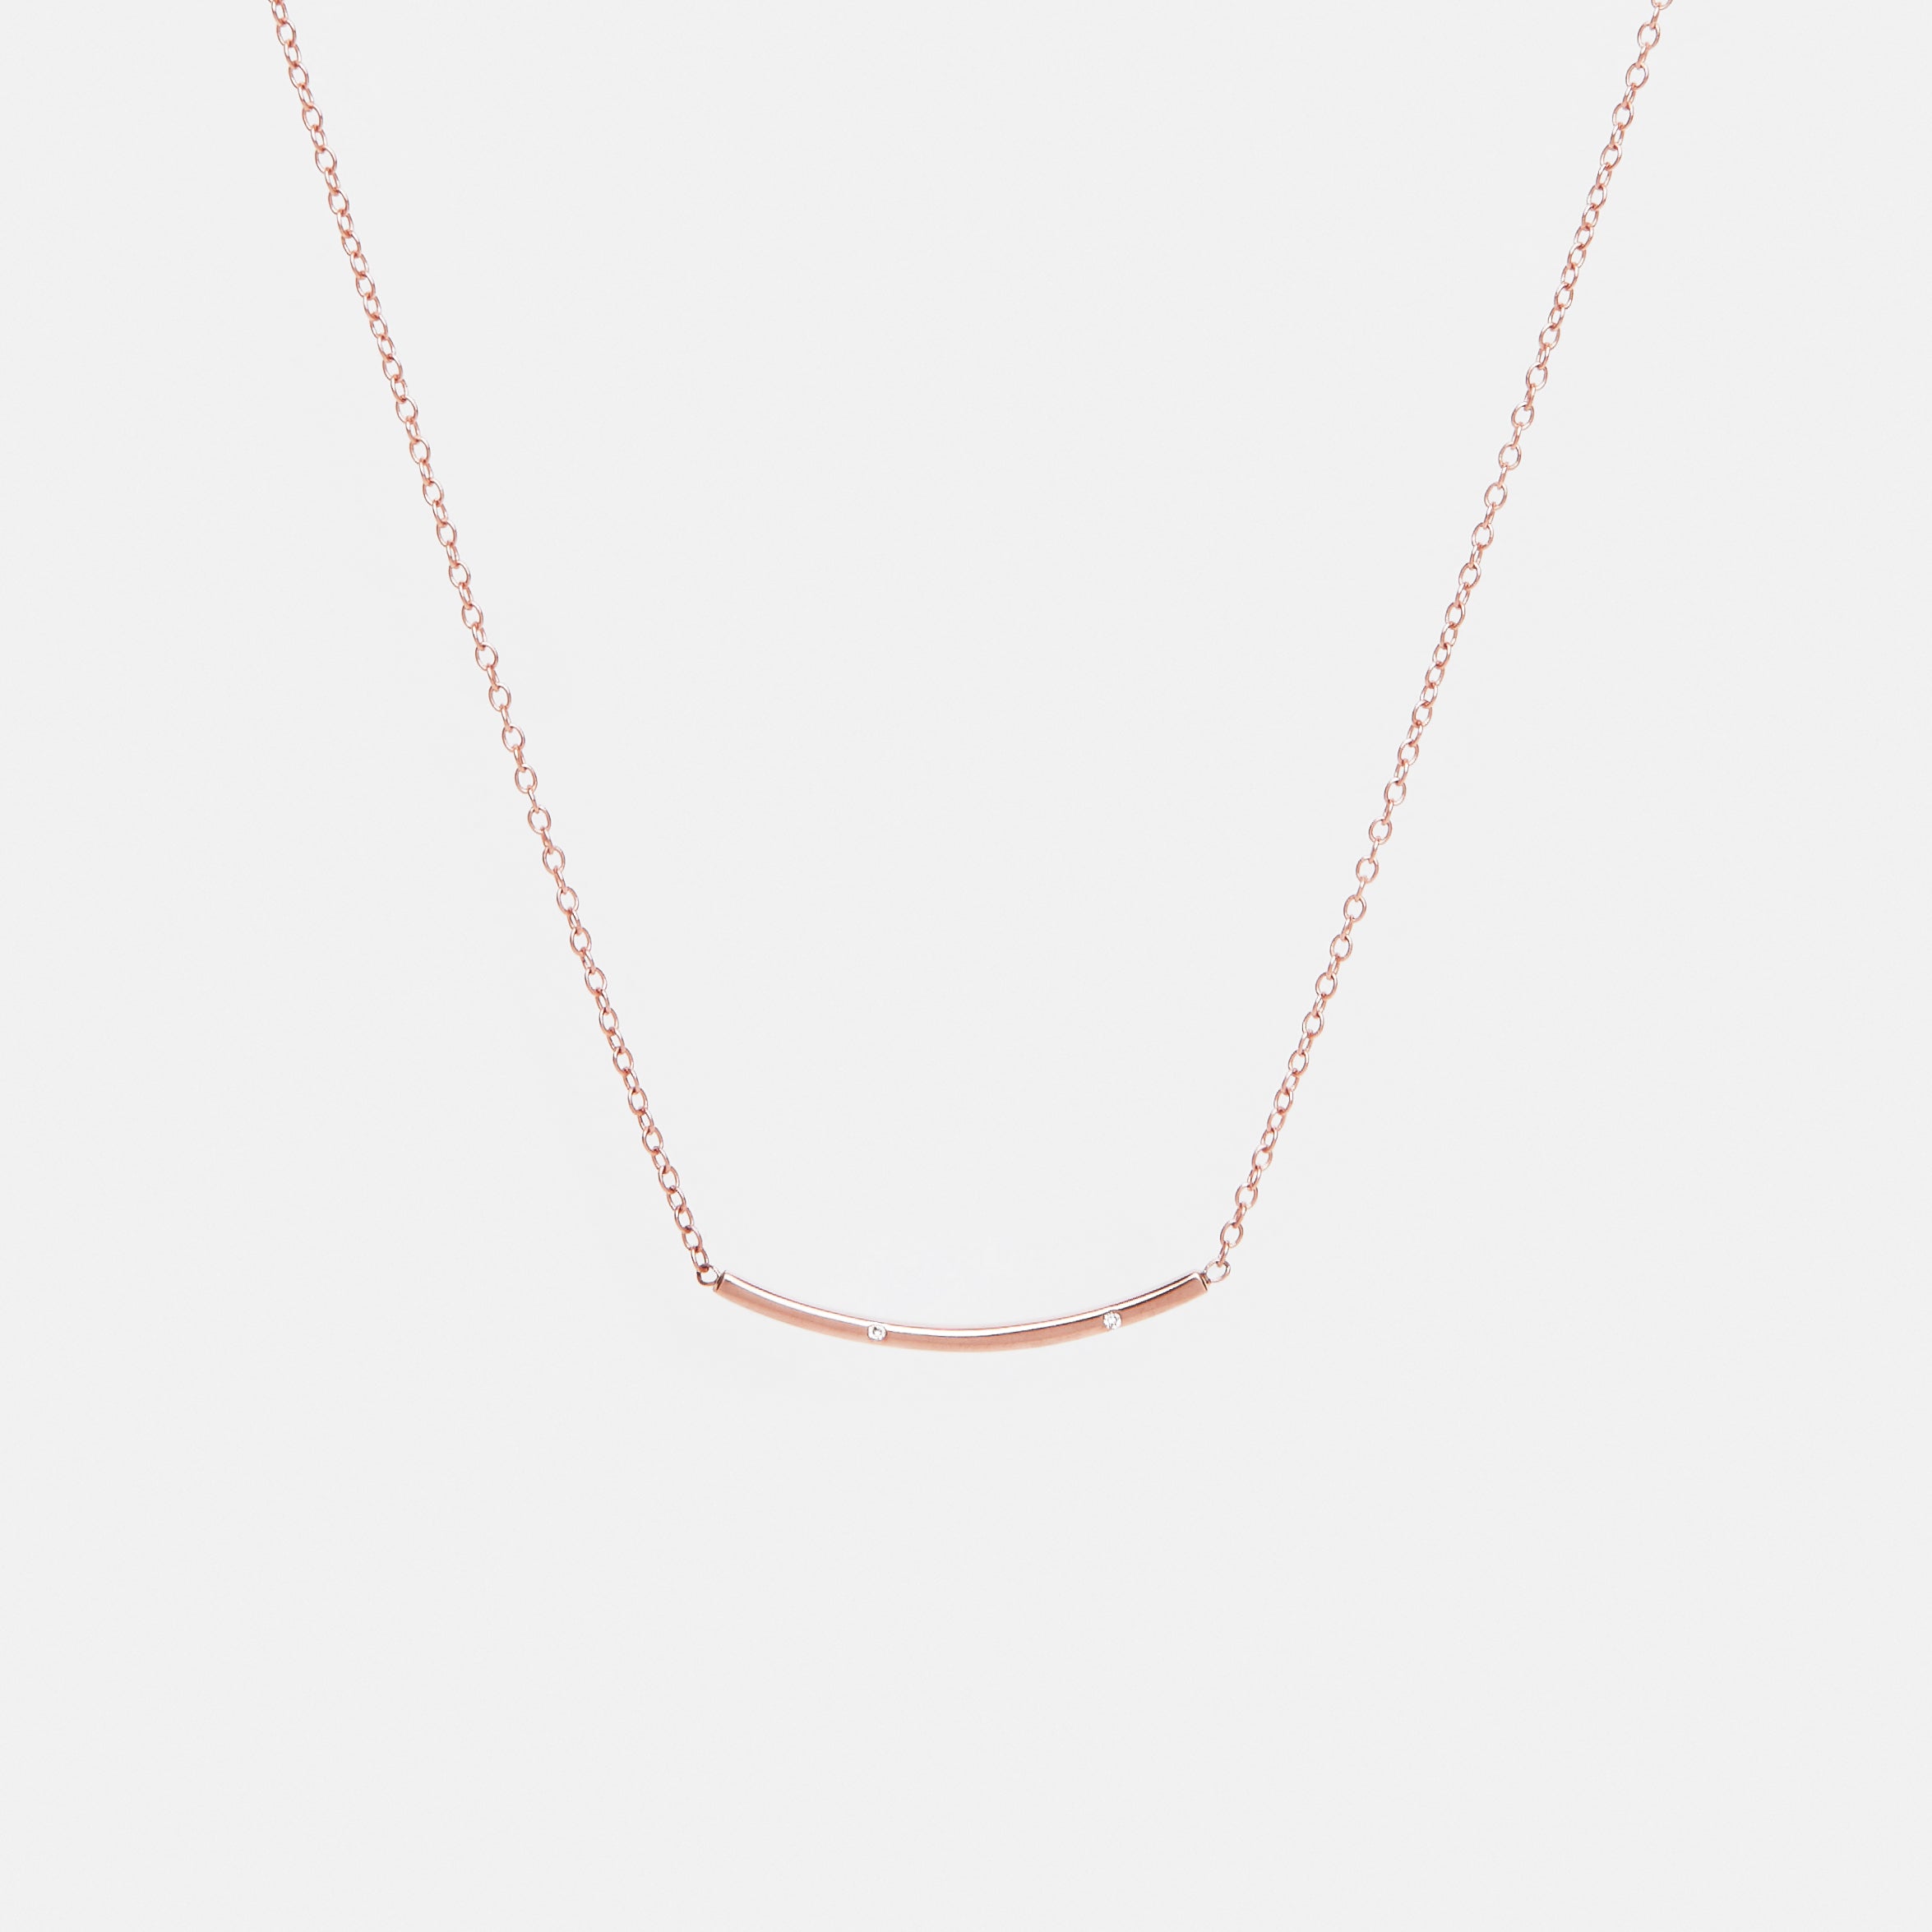 Sara Cool Necklace in 14k Rose Gold set with White Diamonds By SHW Fine Jewelry NYC